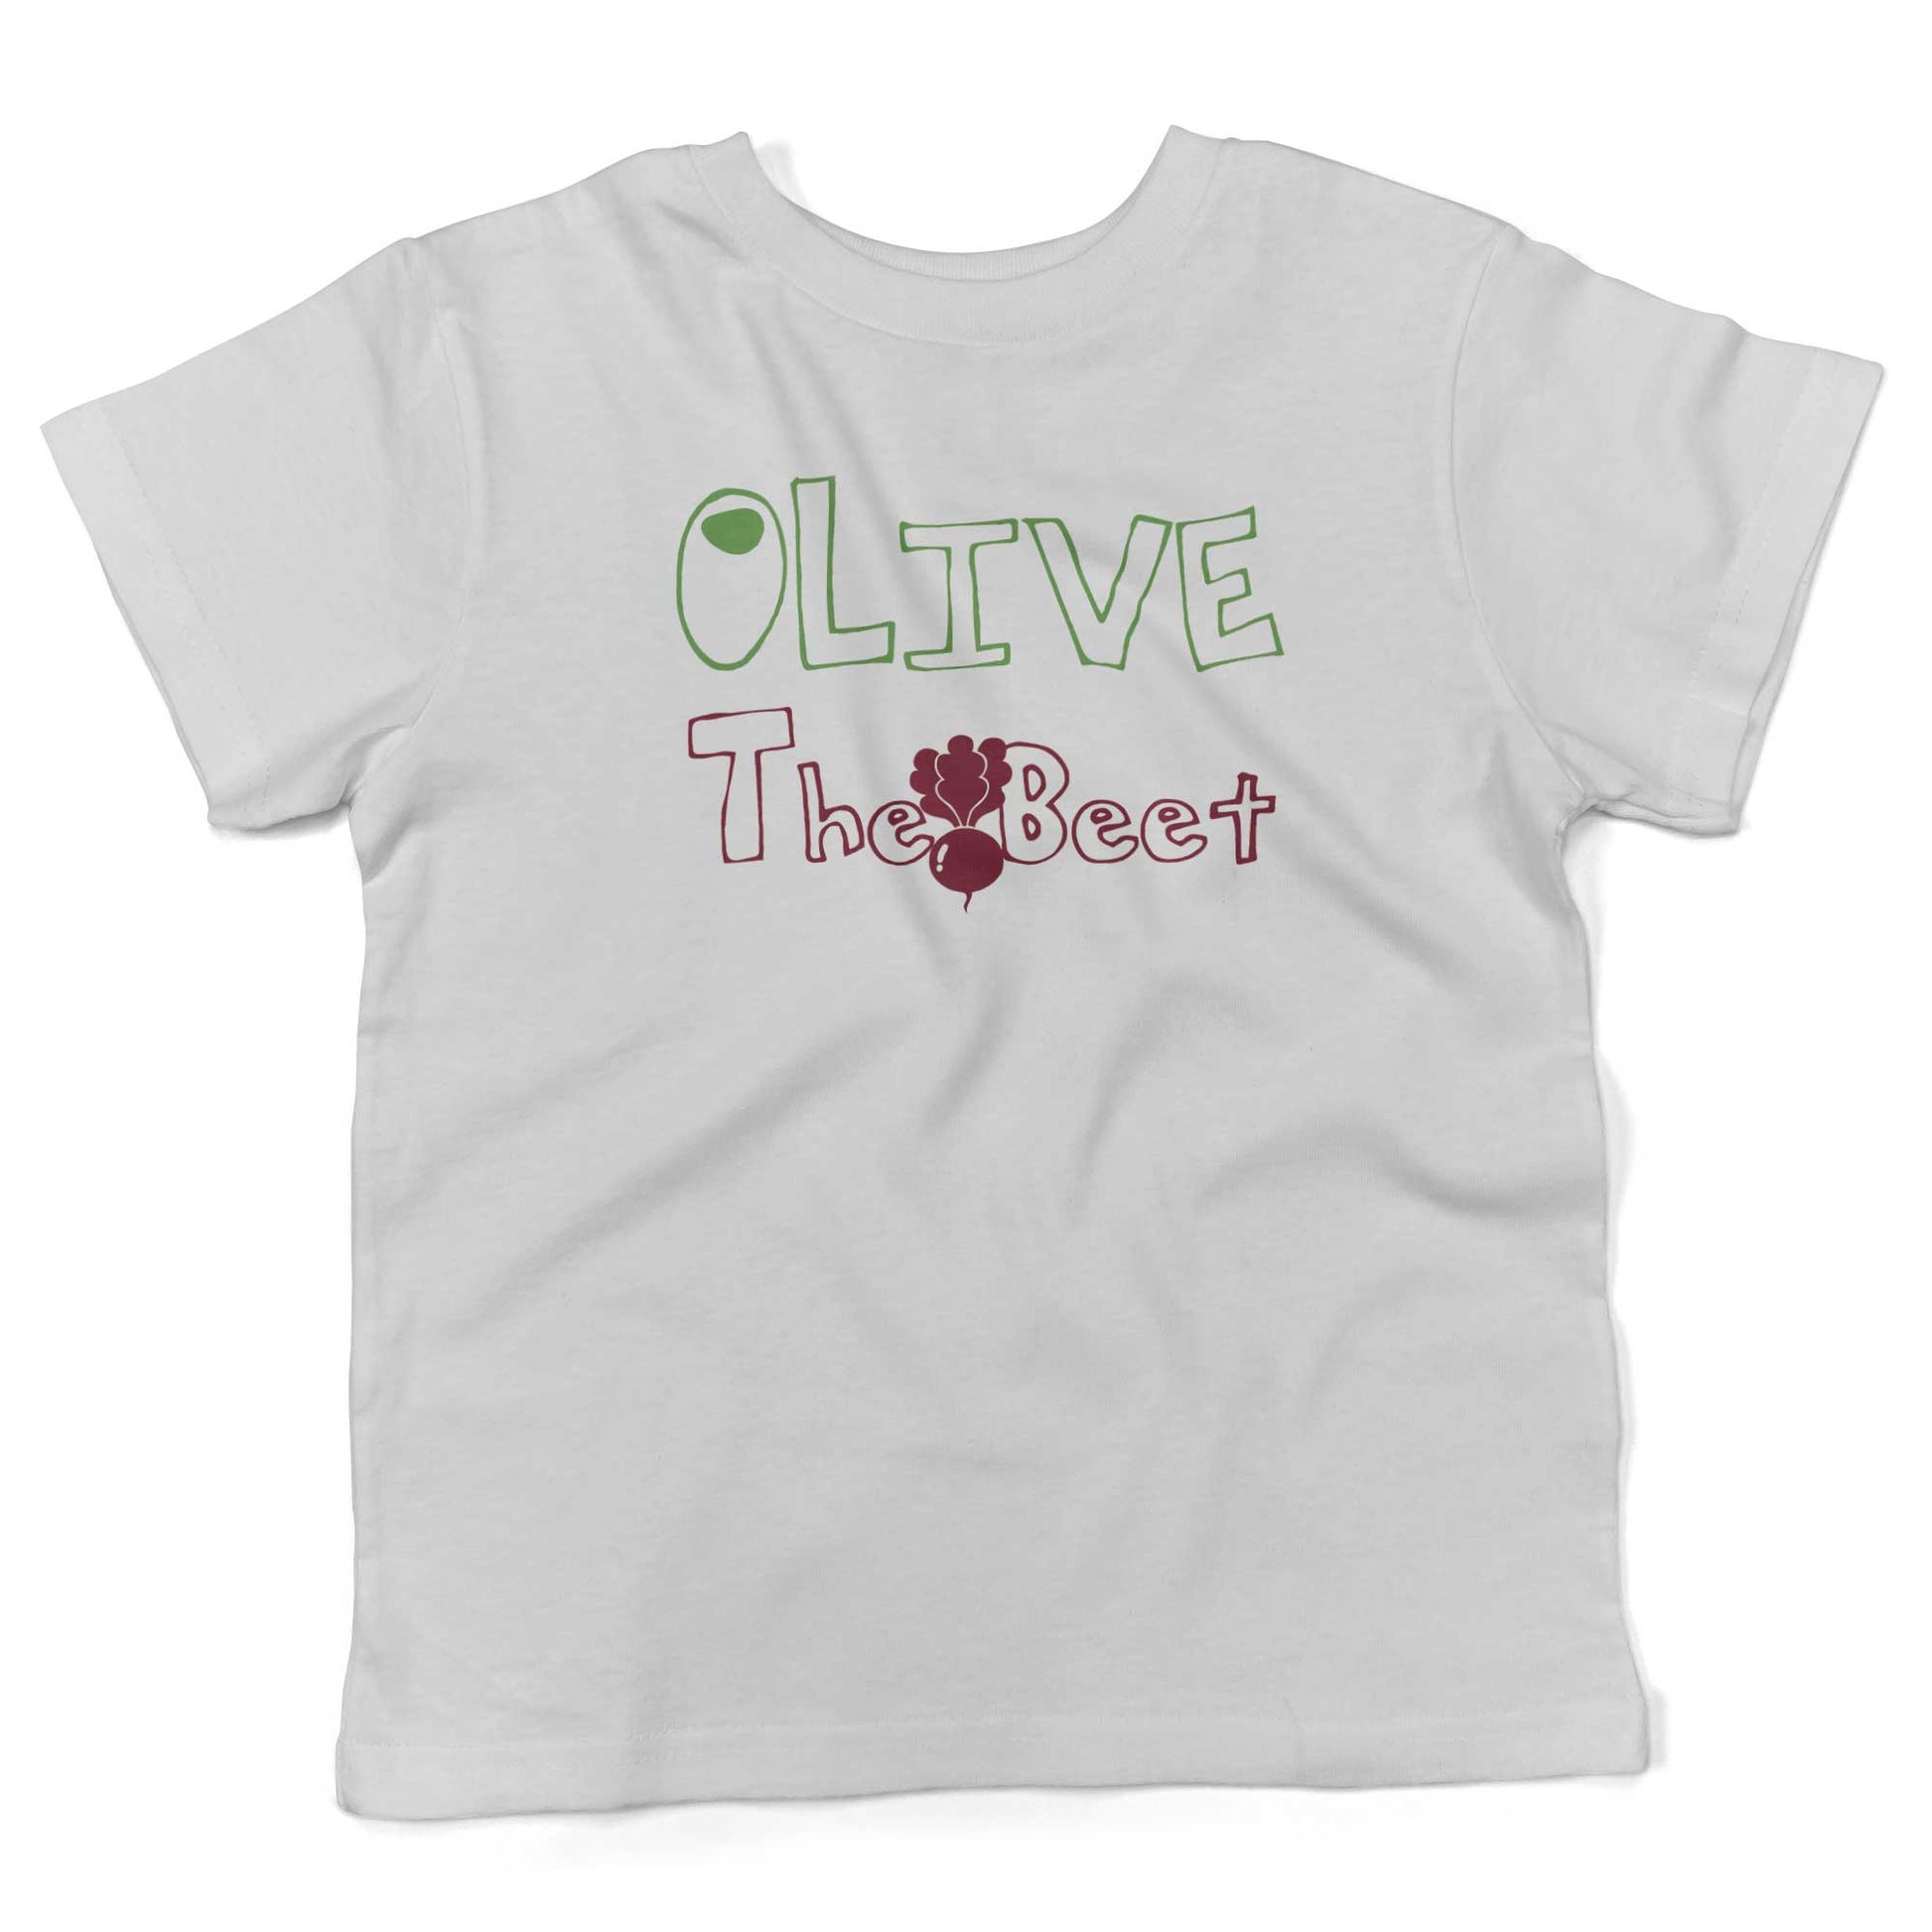 Olive The Beet Toddler Shirt-White-2T